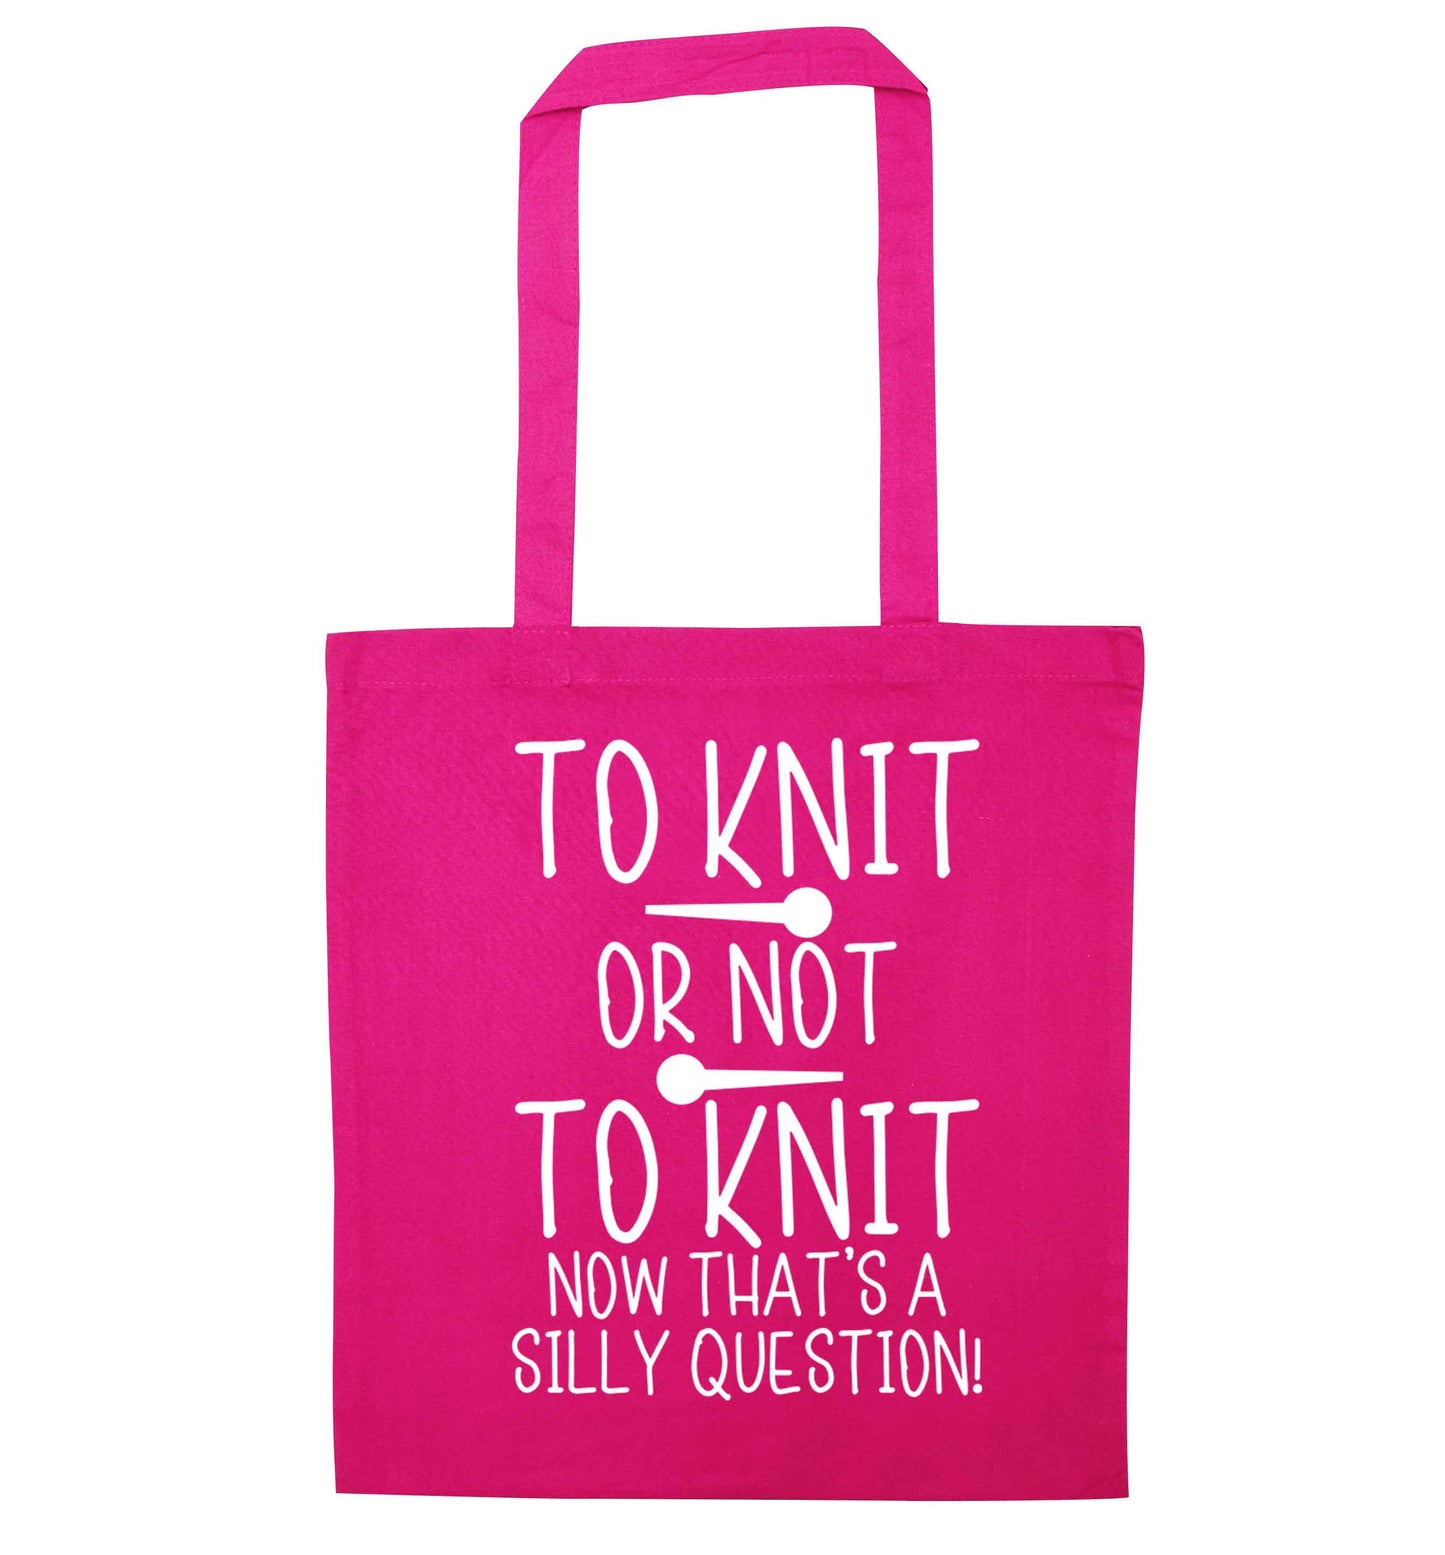 To knit or not to knit now that's a silly question pink tote bag